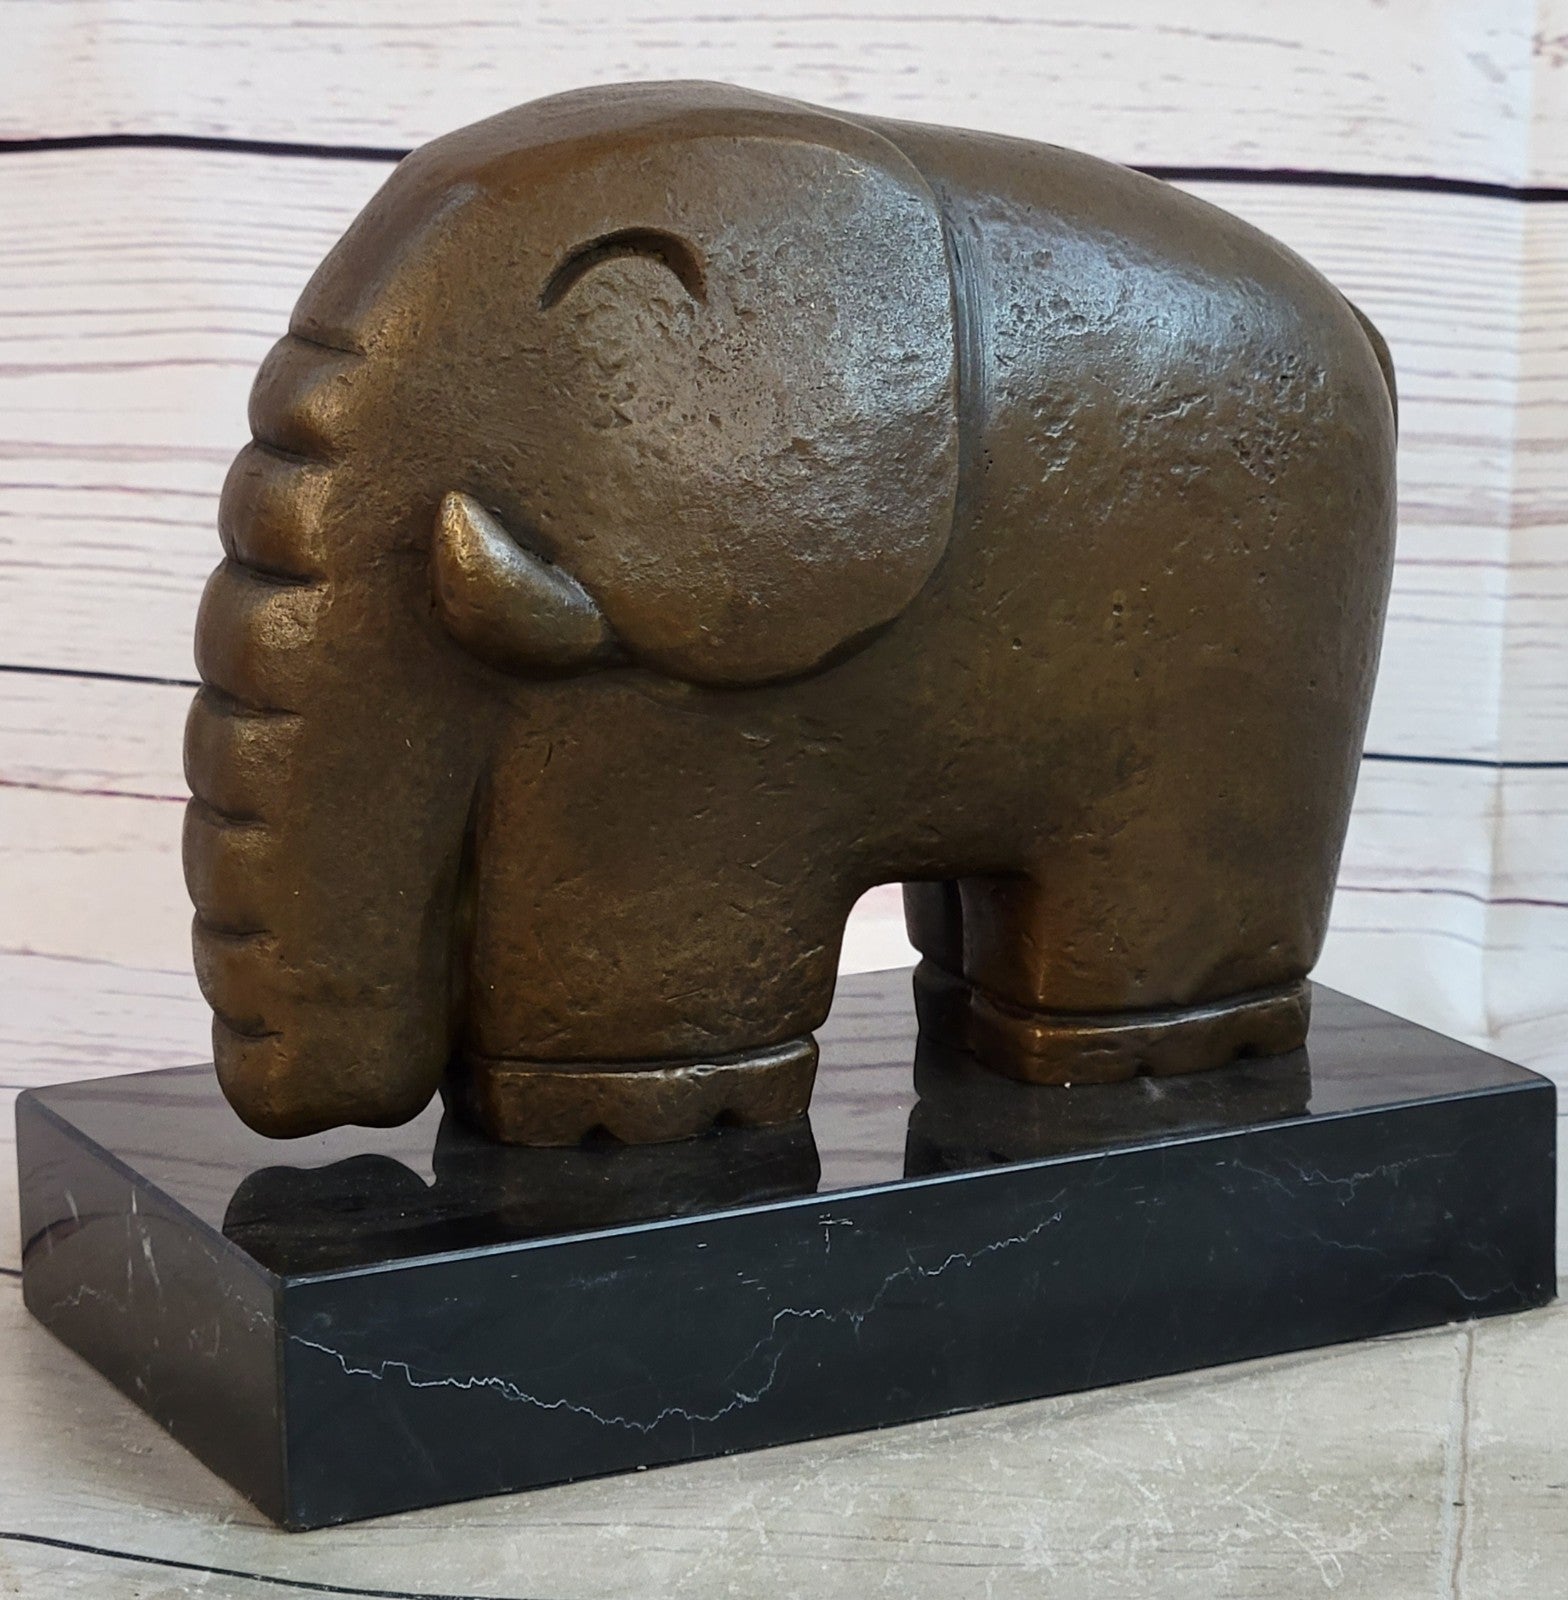 Bronze Sculpture Model Chubby Elephant by Dali Collectible Figurine Figure Gift